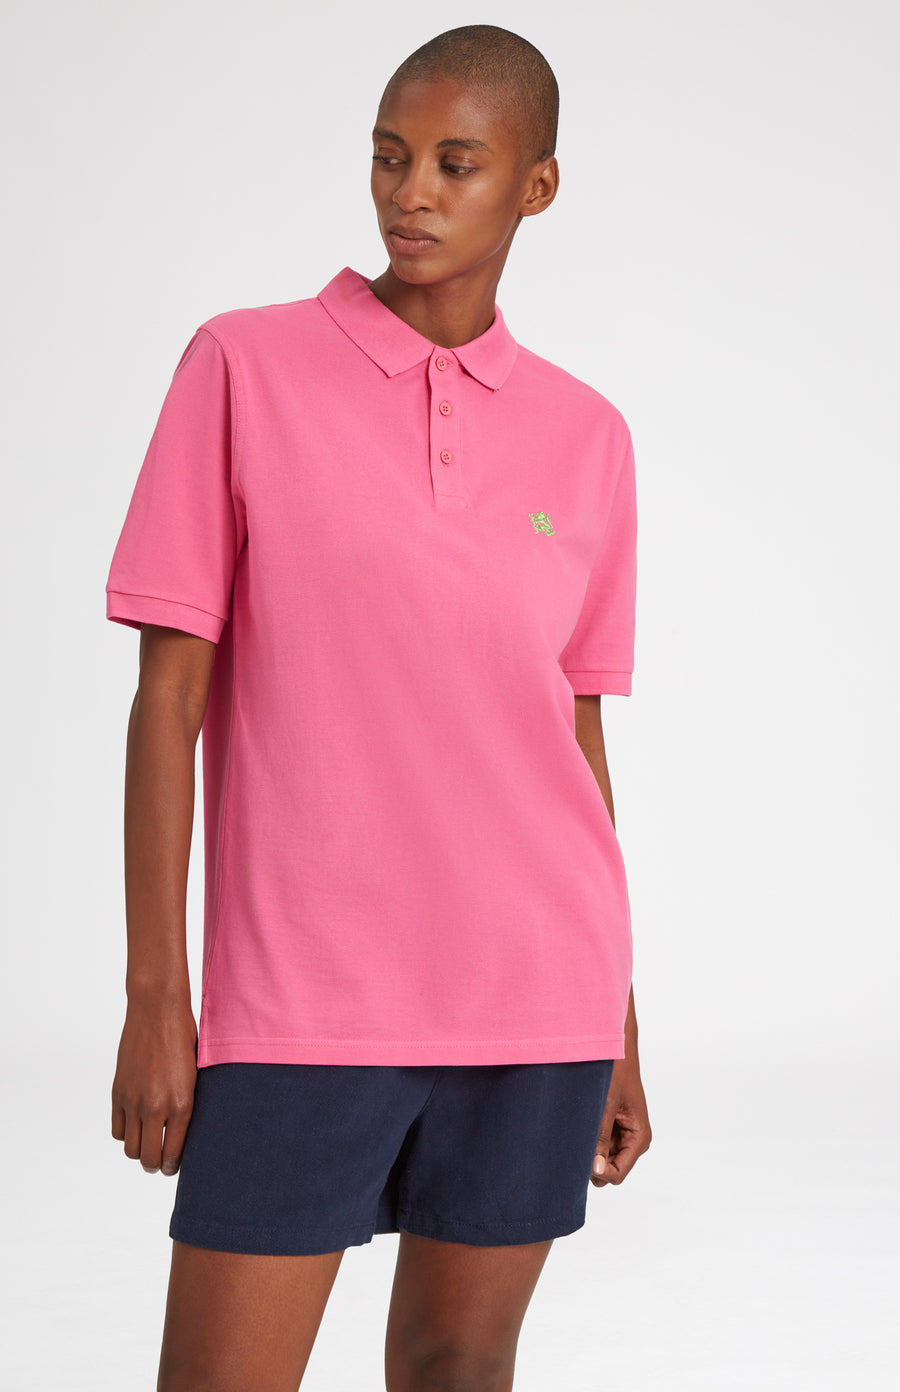 Cotton Heritage Golf Polo Shirt In Heather Pink on a woman - Pringle of Scotland